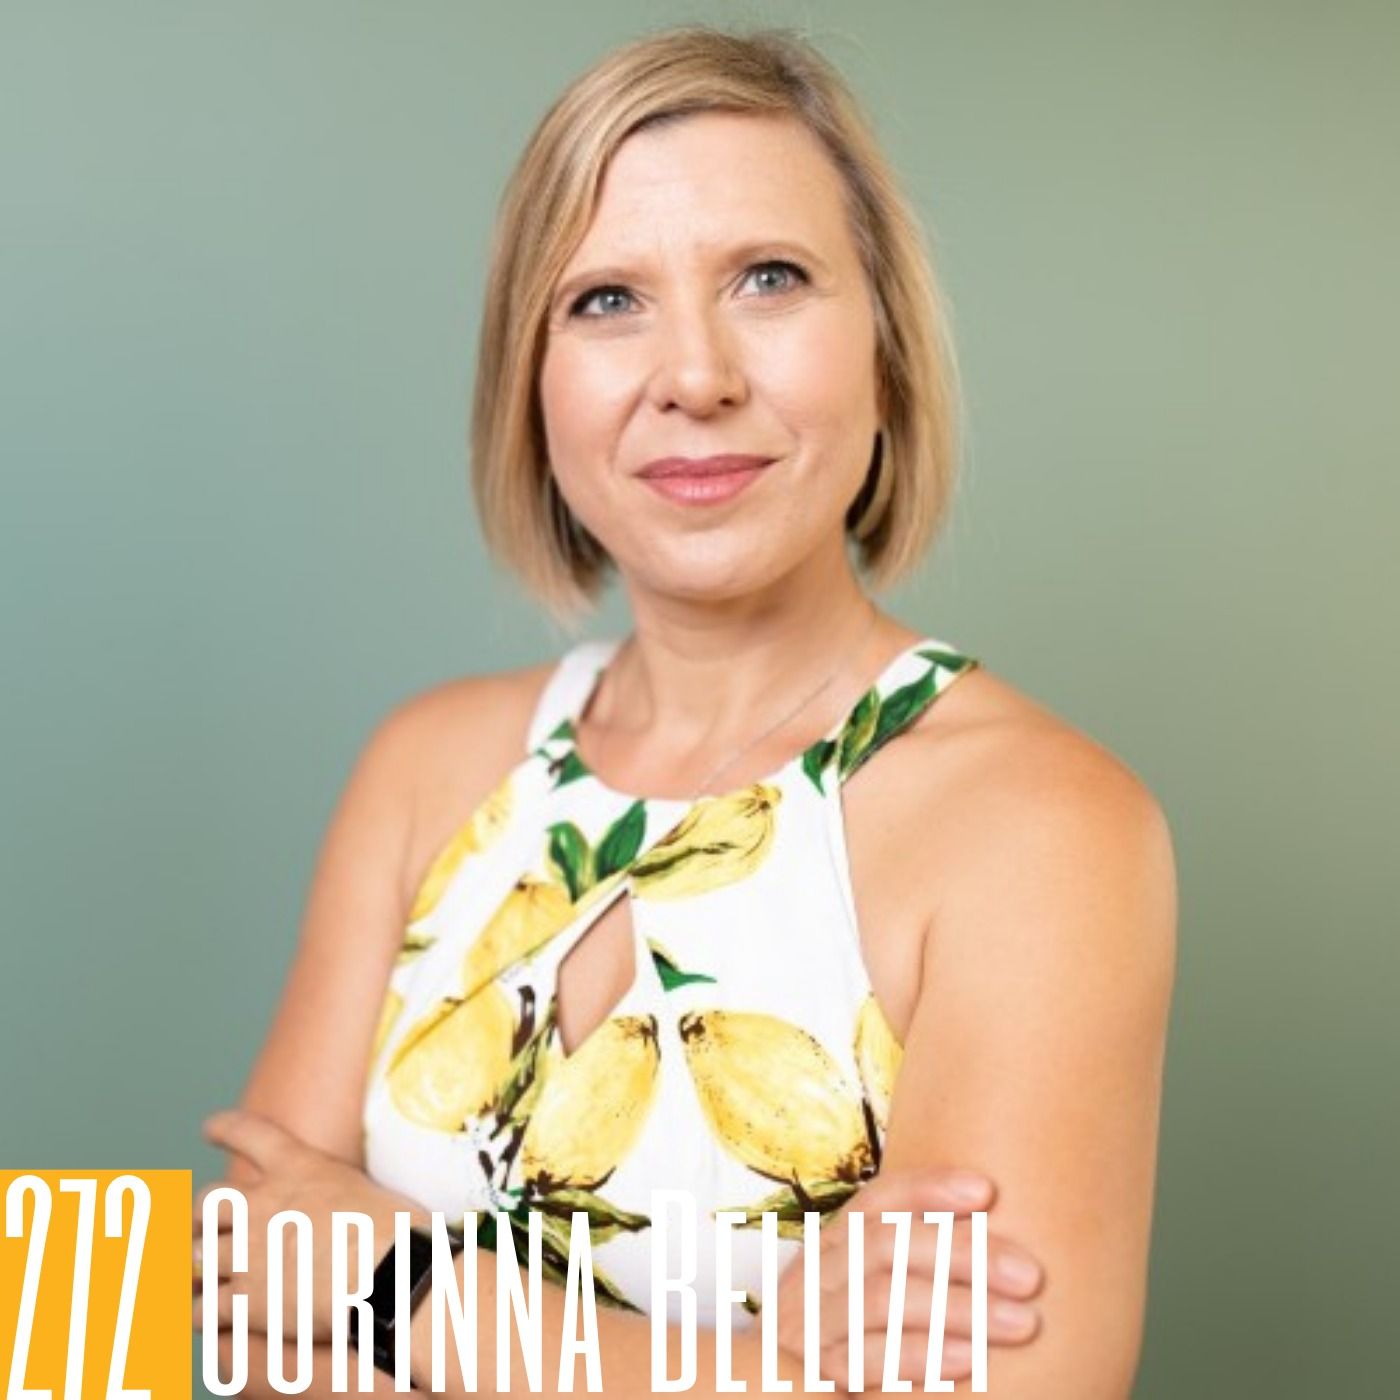 272 Corinna Bellizzi - Fulfilling a Growing Need for Change